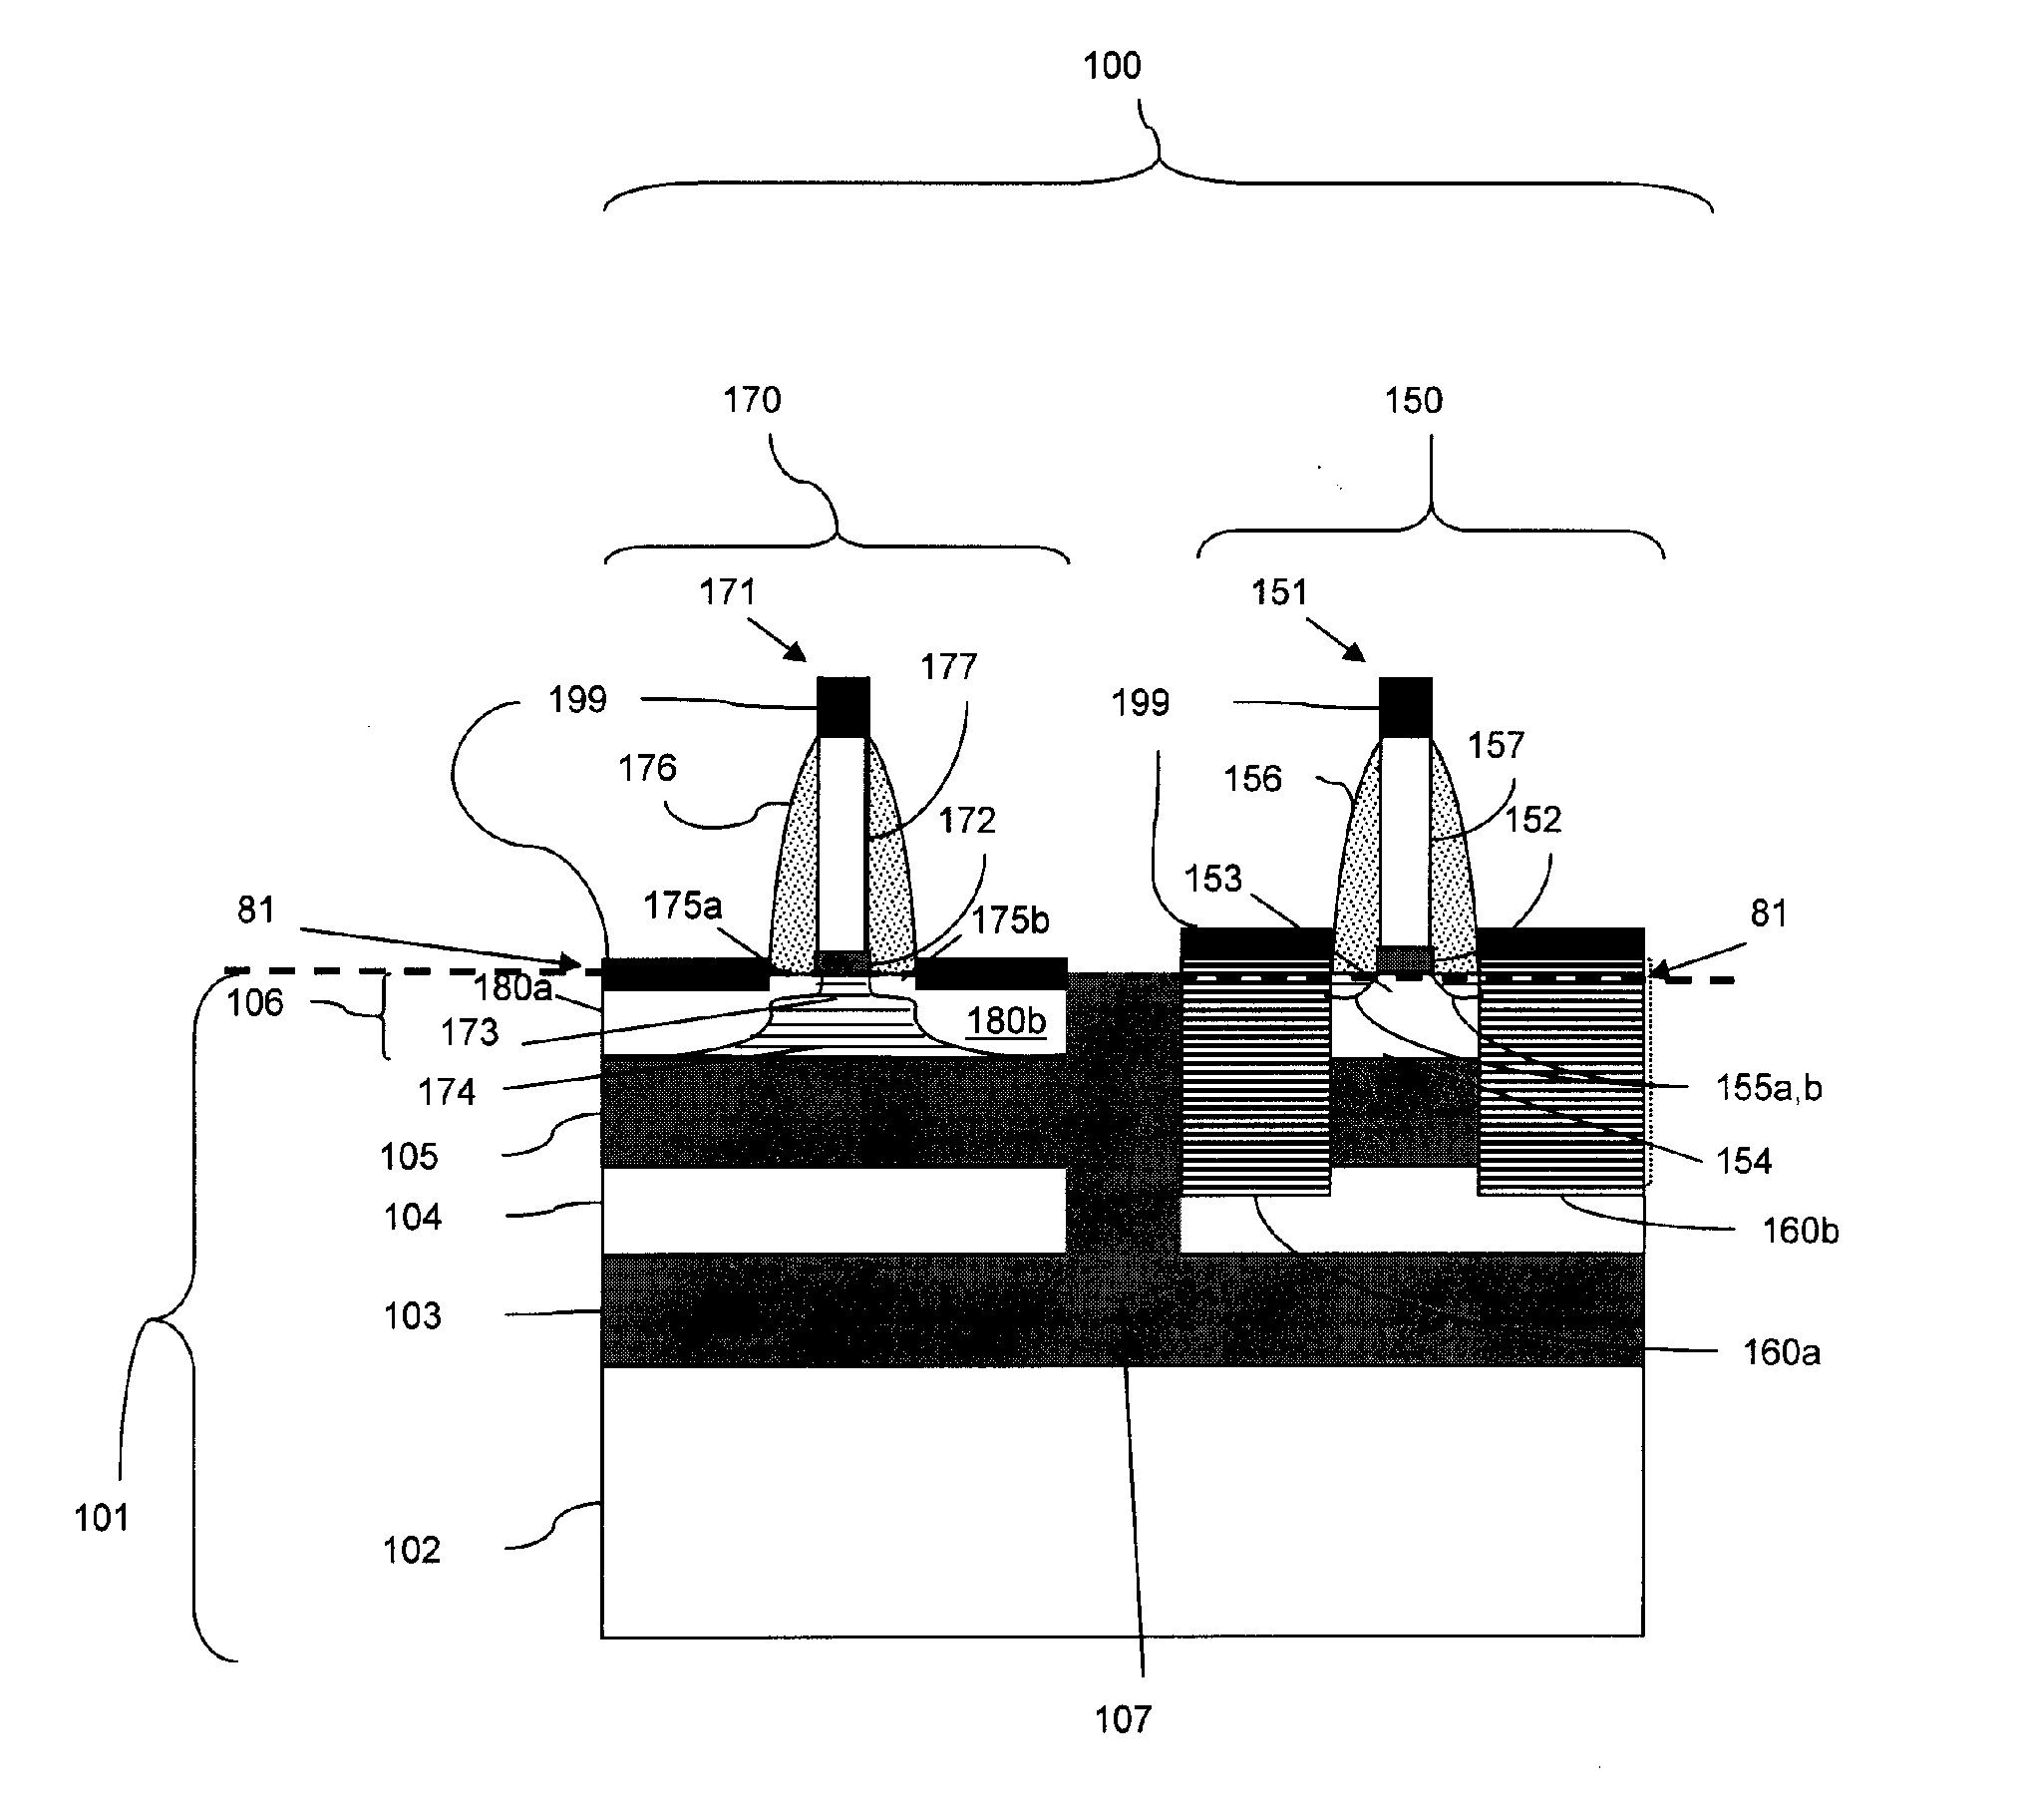 Embedded silicon germanium using a double buried oxide silicon-on-insulator wafer